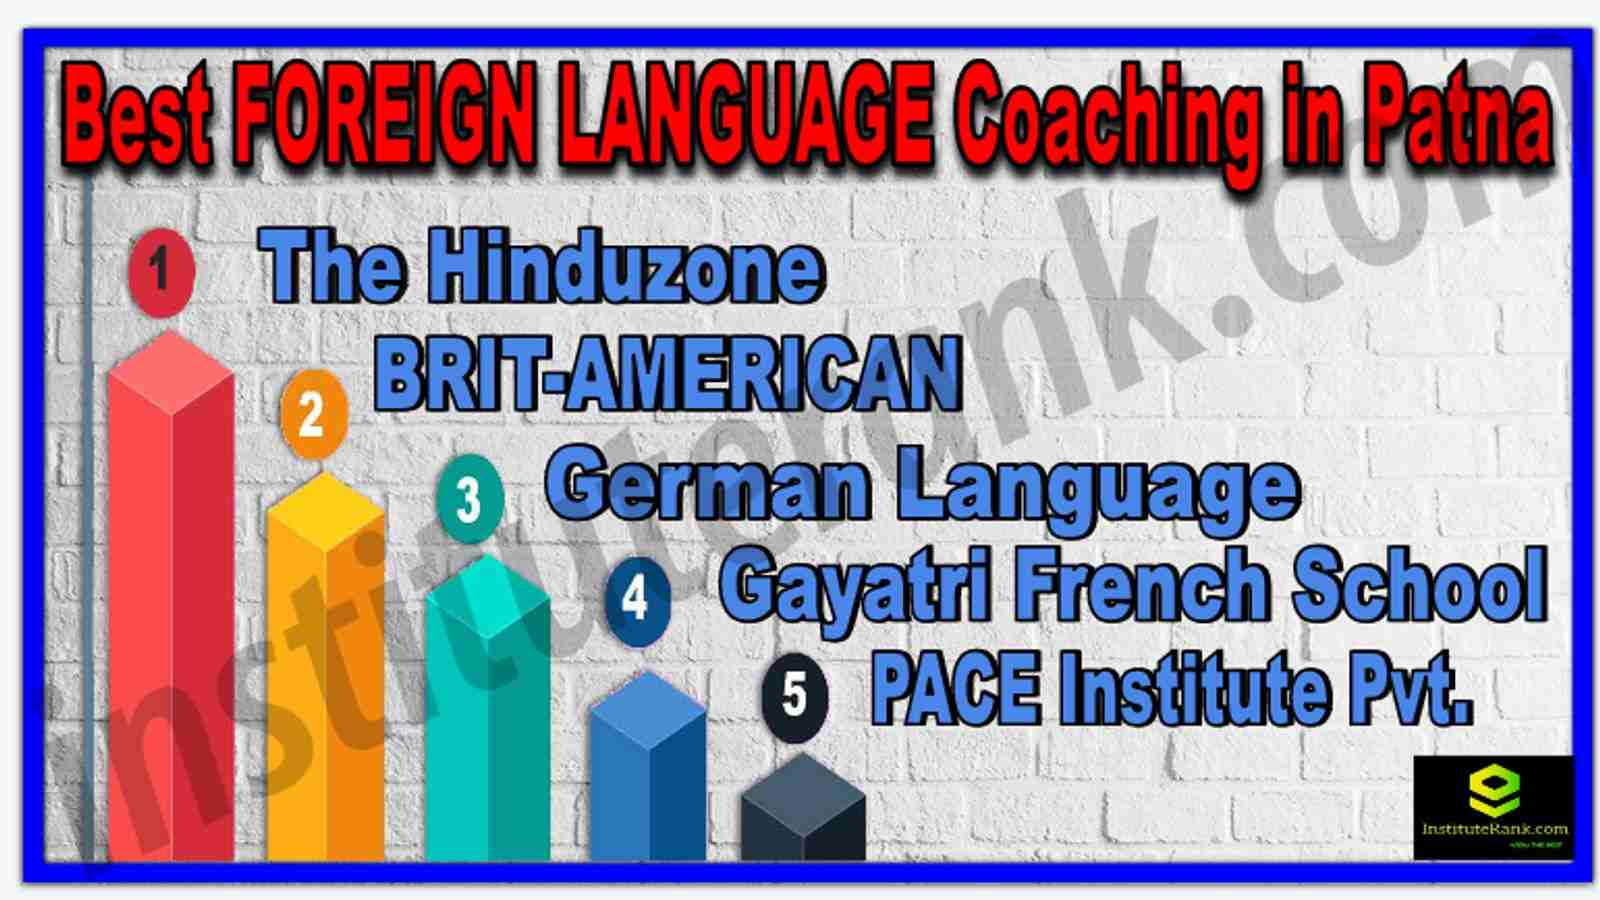 Best FOREIGN LANGUAGE Coaching in Patna